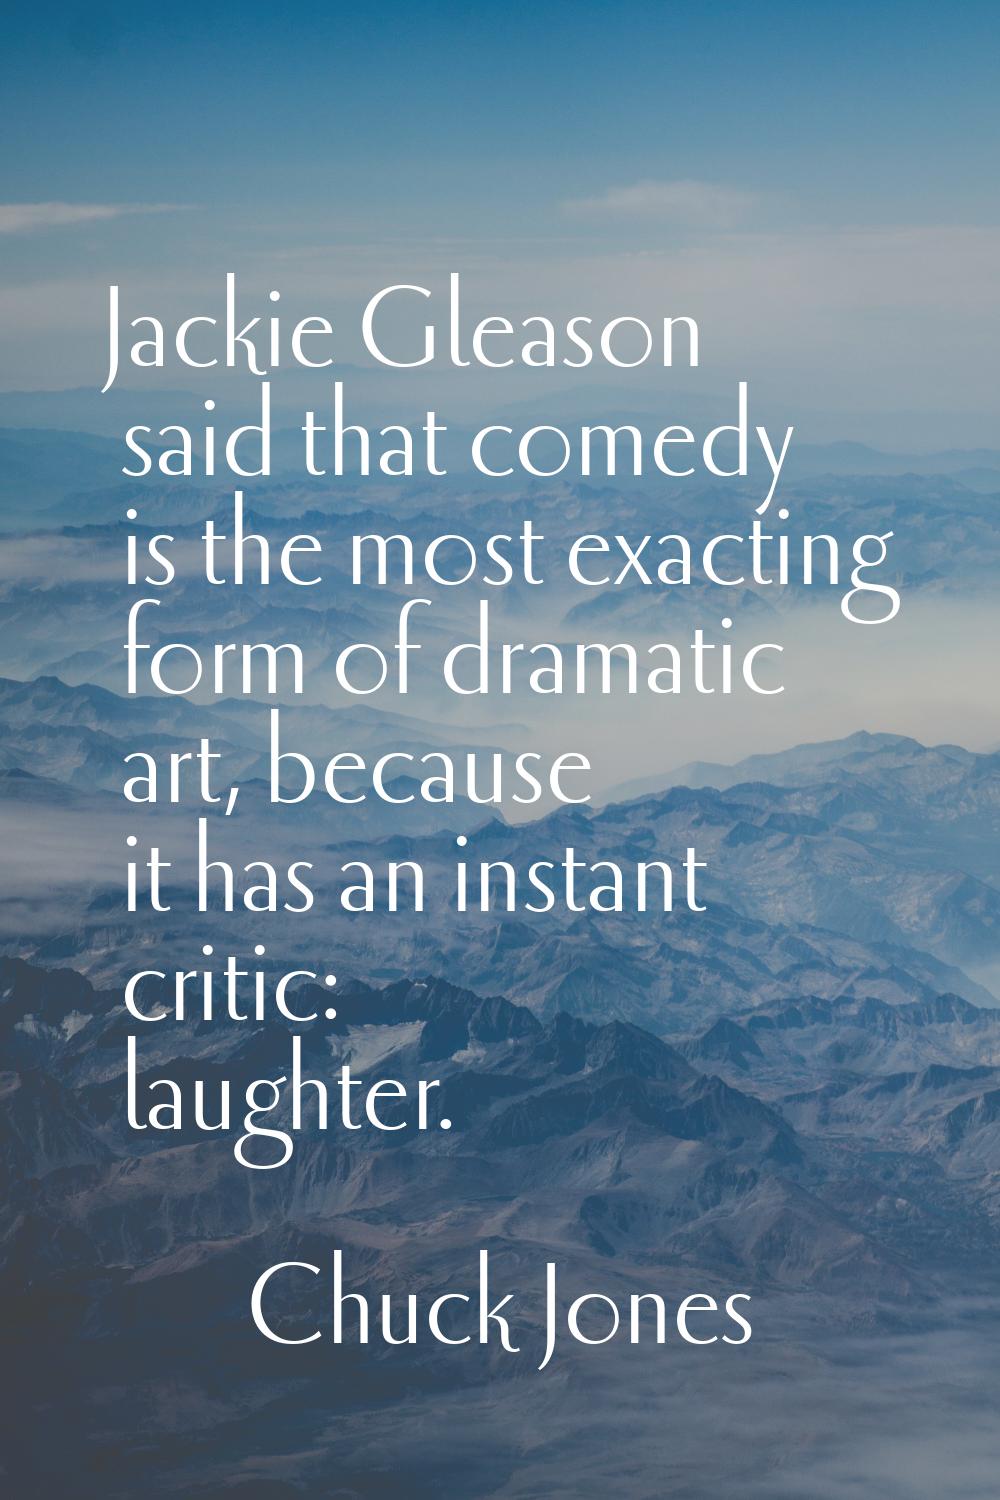 Jackie Gleason said that comedy is the most exacting form of dramatic art, because it has an instan